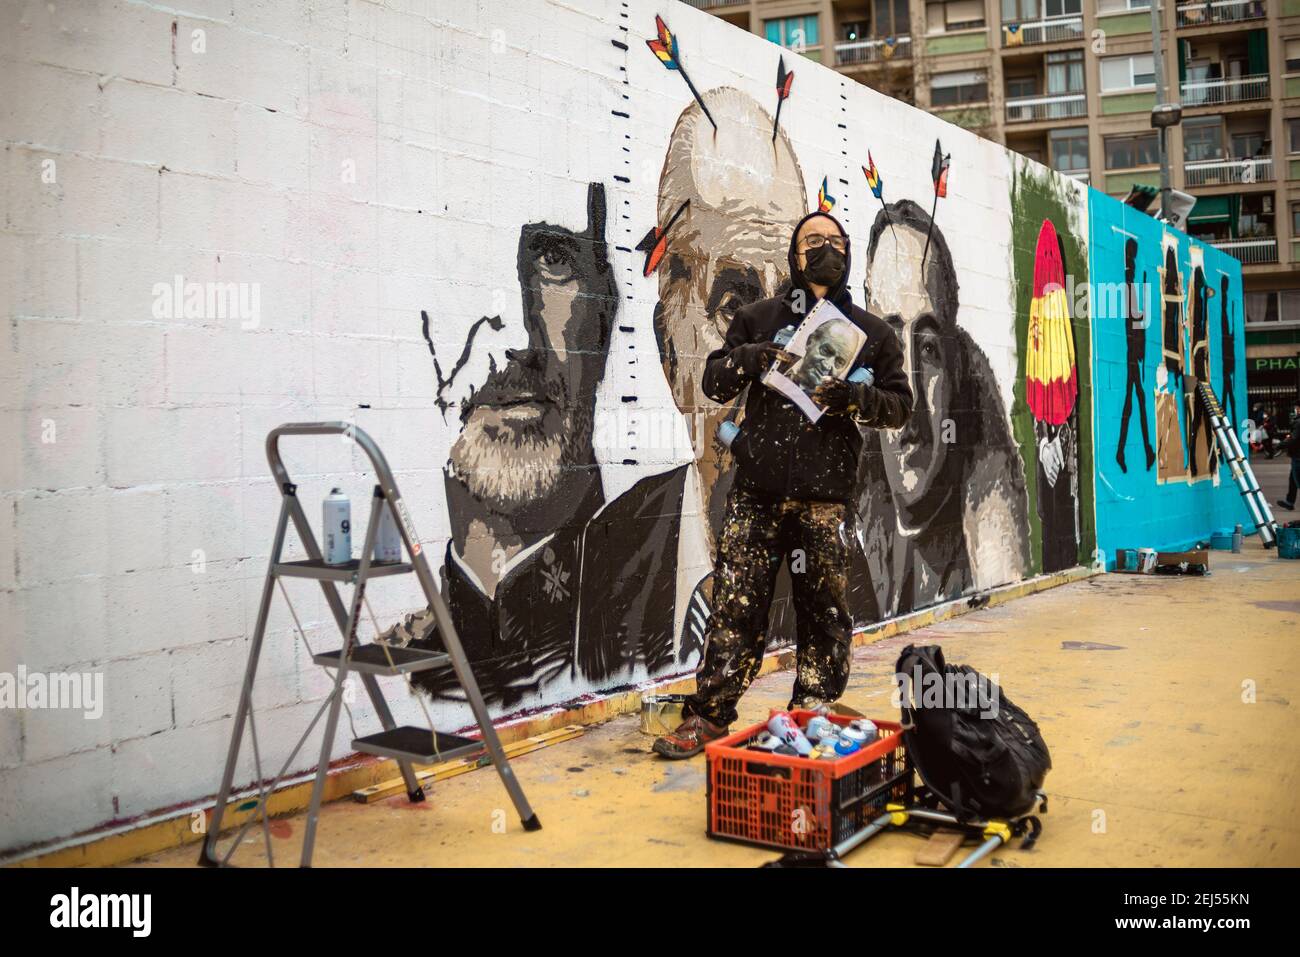 Barcelona, Spain. 21st Feb, 2021. A street artist paints graffiti criticizing Spain's monarchy in support of imprisoned rap artist Pablo Hasel. convicted to jail for glorifying terrorism and insulting Spain's former king in lyrics, after five nights of riots. Credit: Matthias Oesterle/Alamy Live News Stock Photo